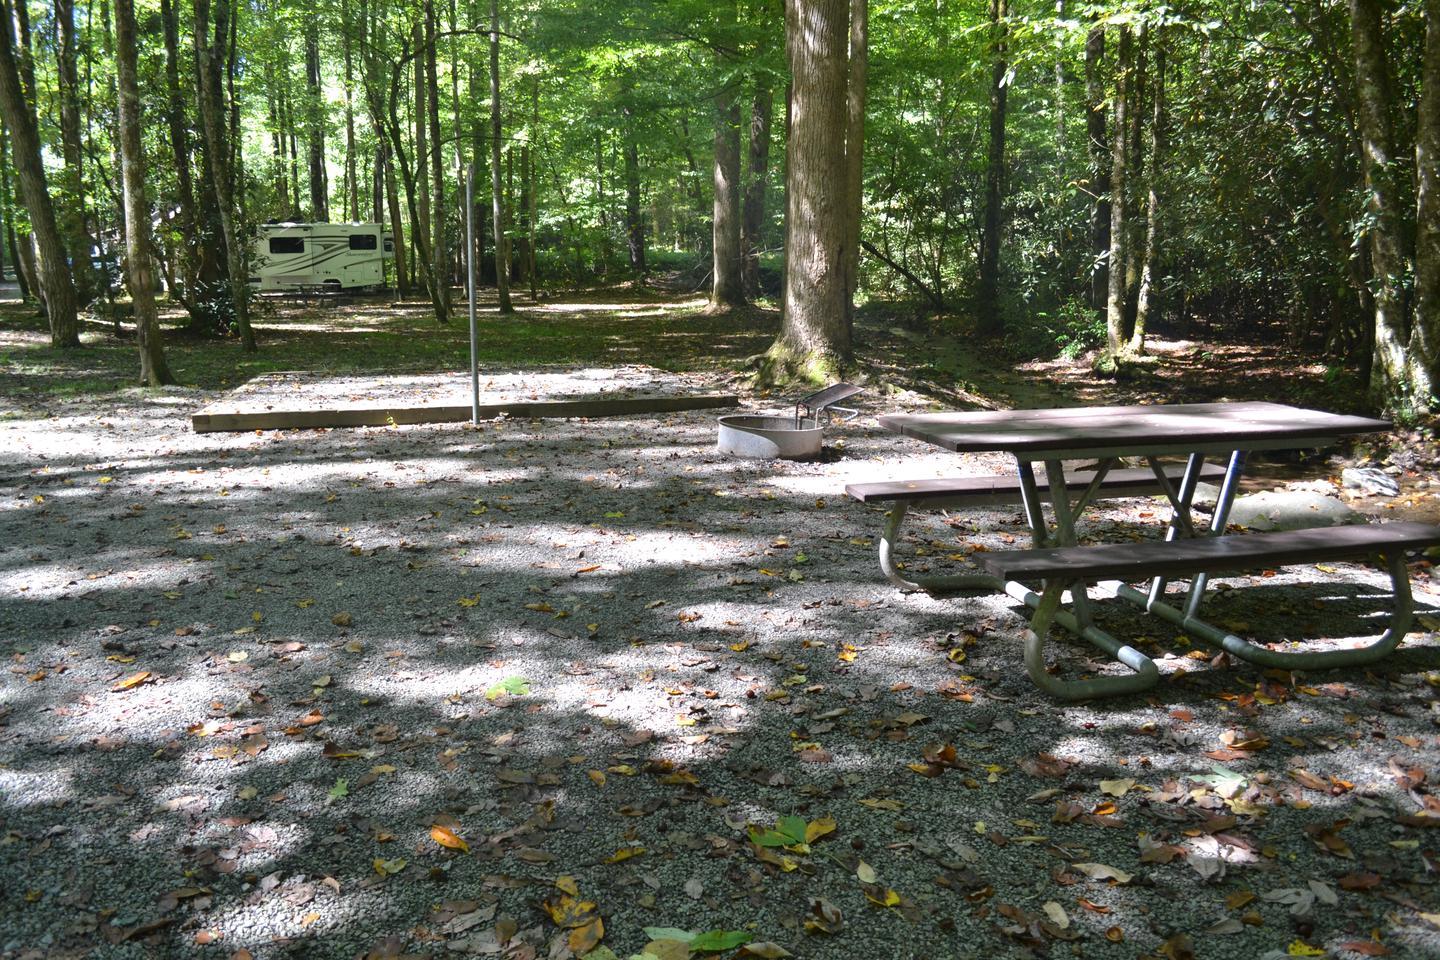 Site 17 Cataloochee CampgroundView from side of campsite showing site layout with picnic table and tent pad